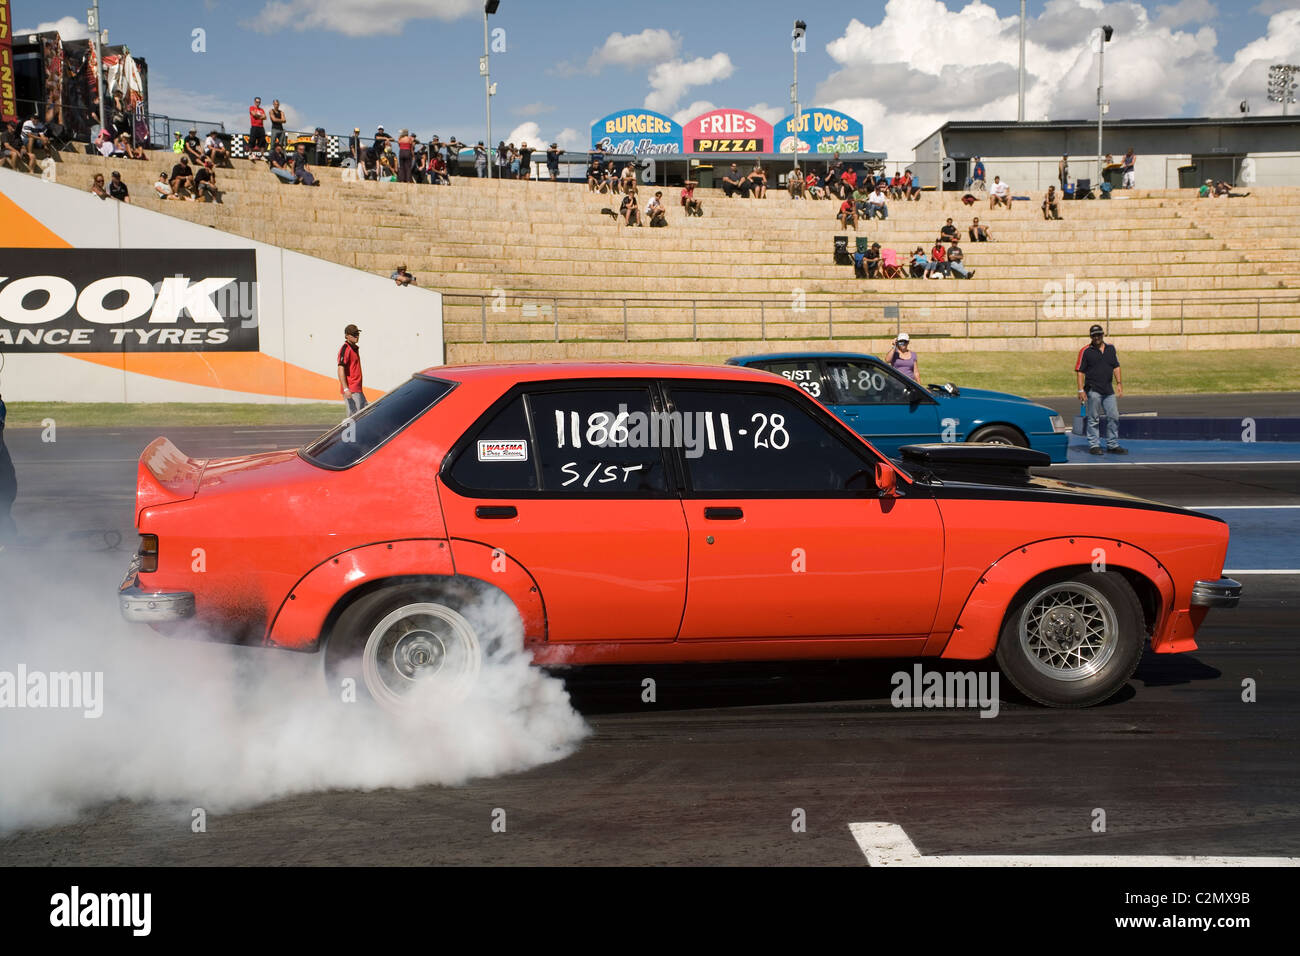 Classic 1970s model Australian Holden Torana performing a burnout at an Aussie drag race meeting. Stock Photo